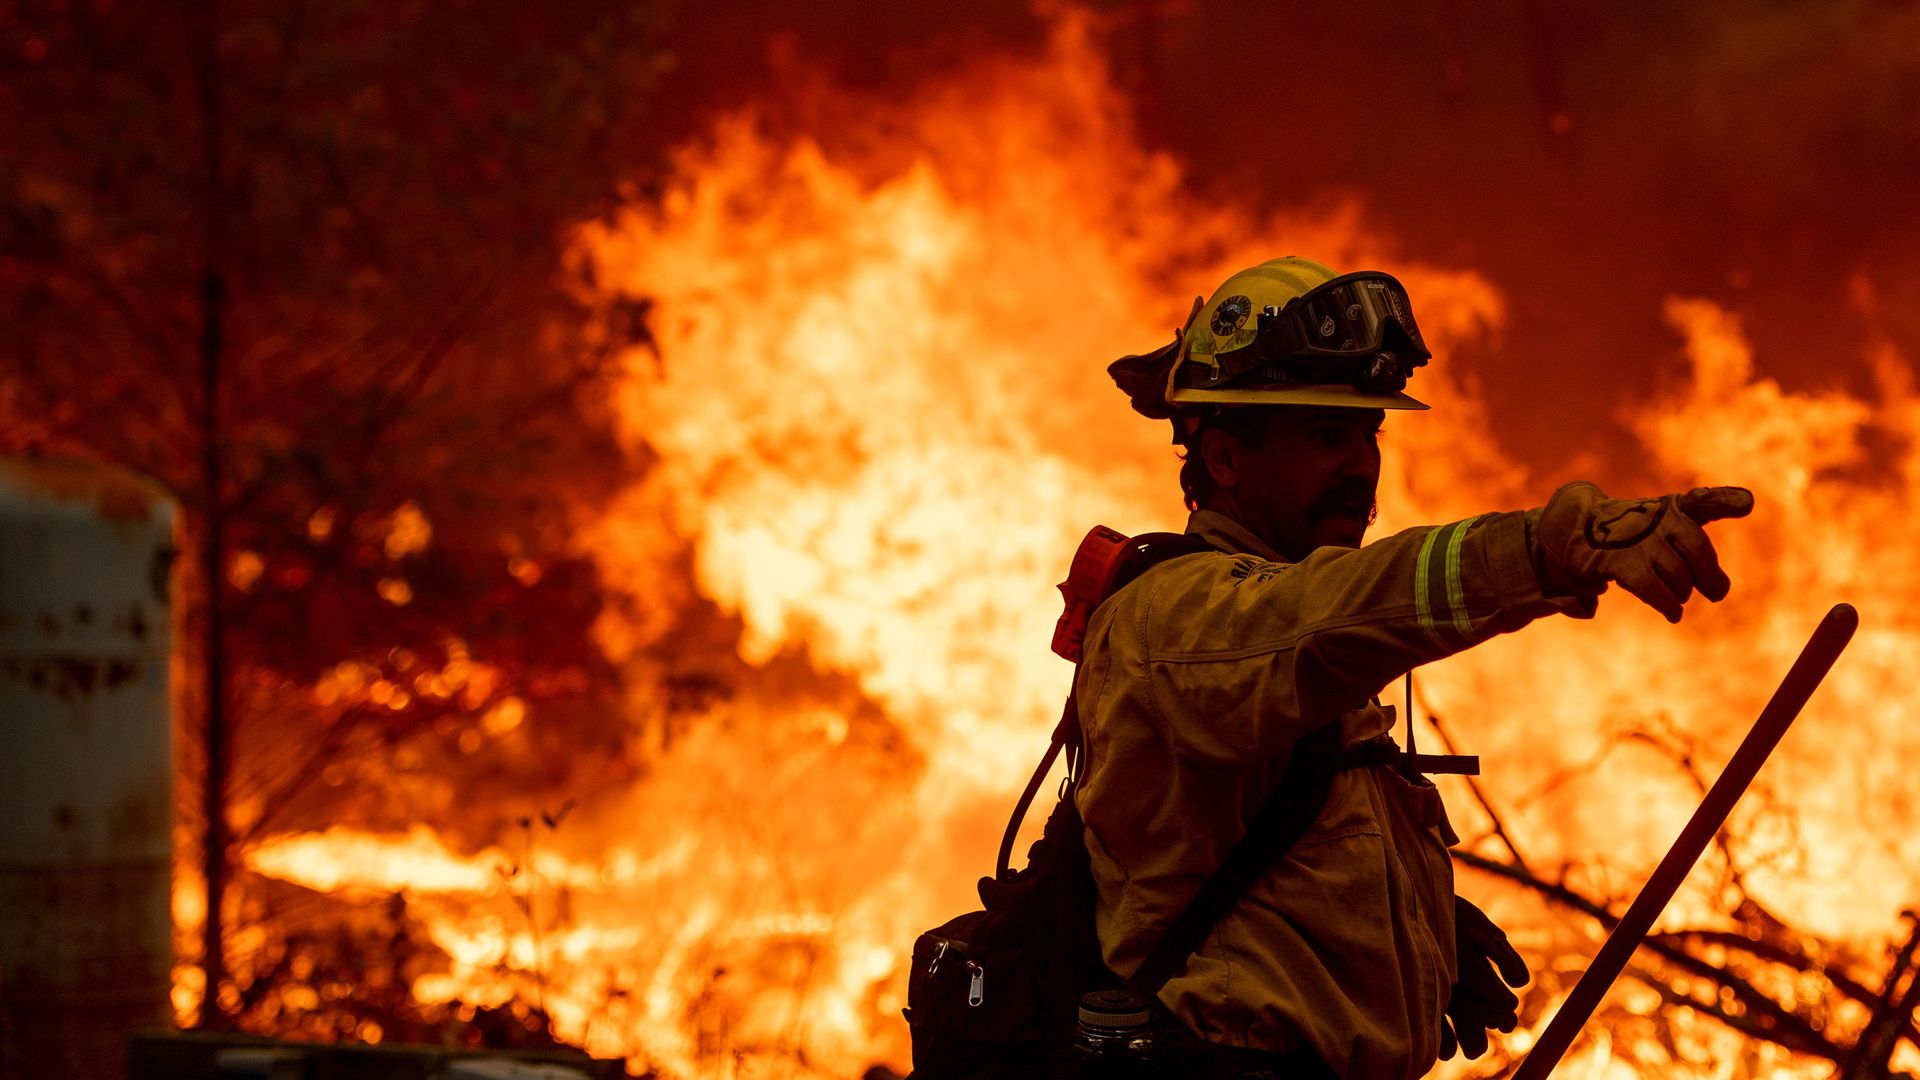 A firefighter motions towards other firefighters as they work the scene during the Glass fire in St. Helena, California on September 27